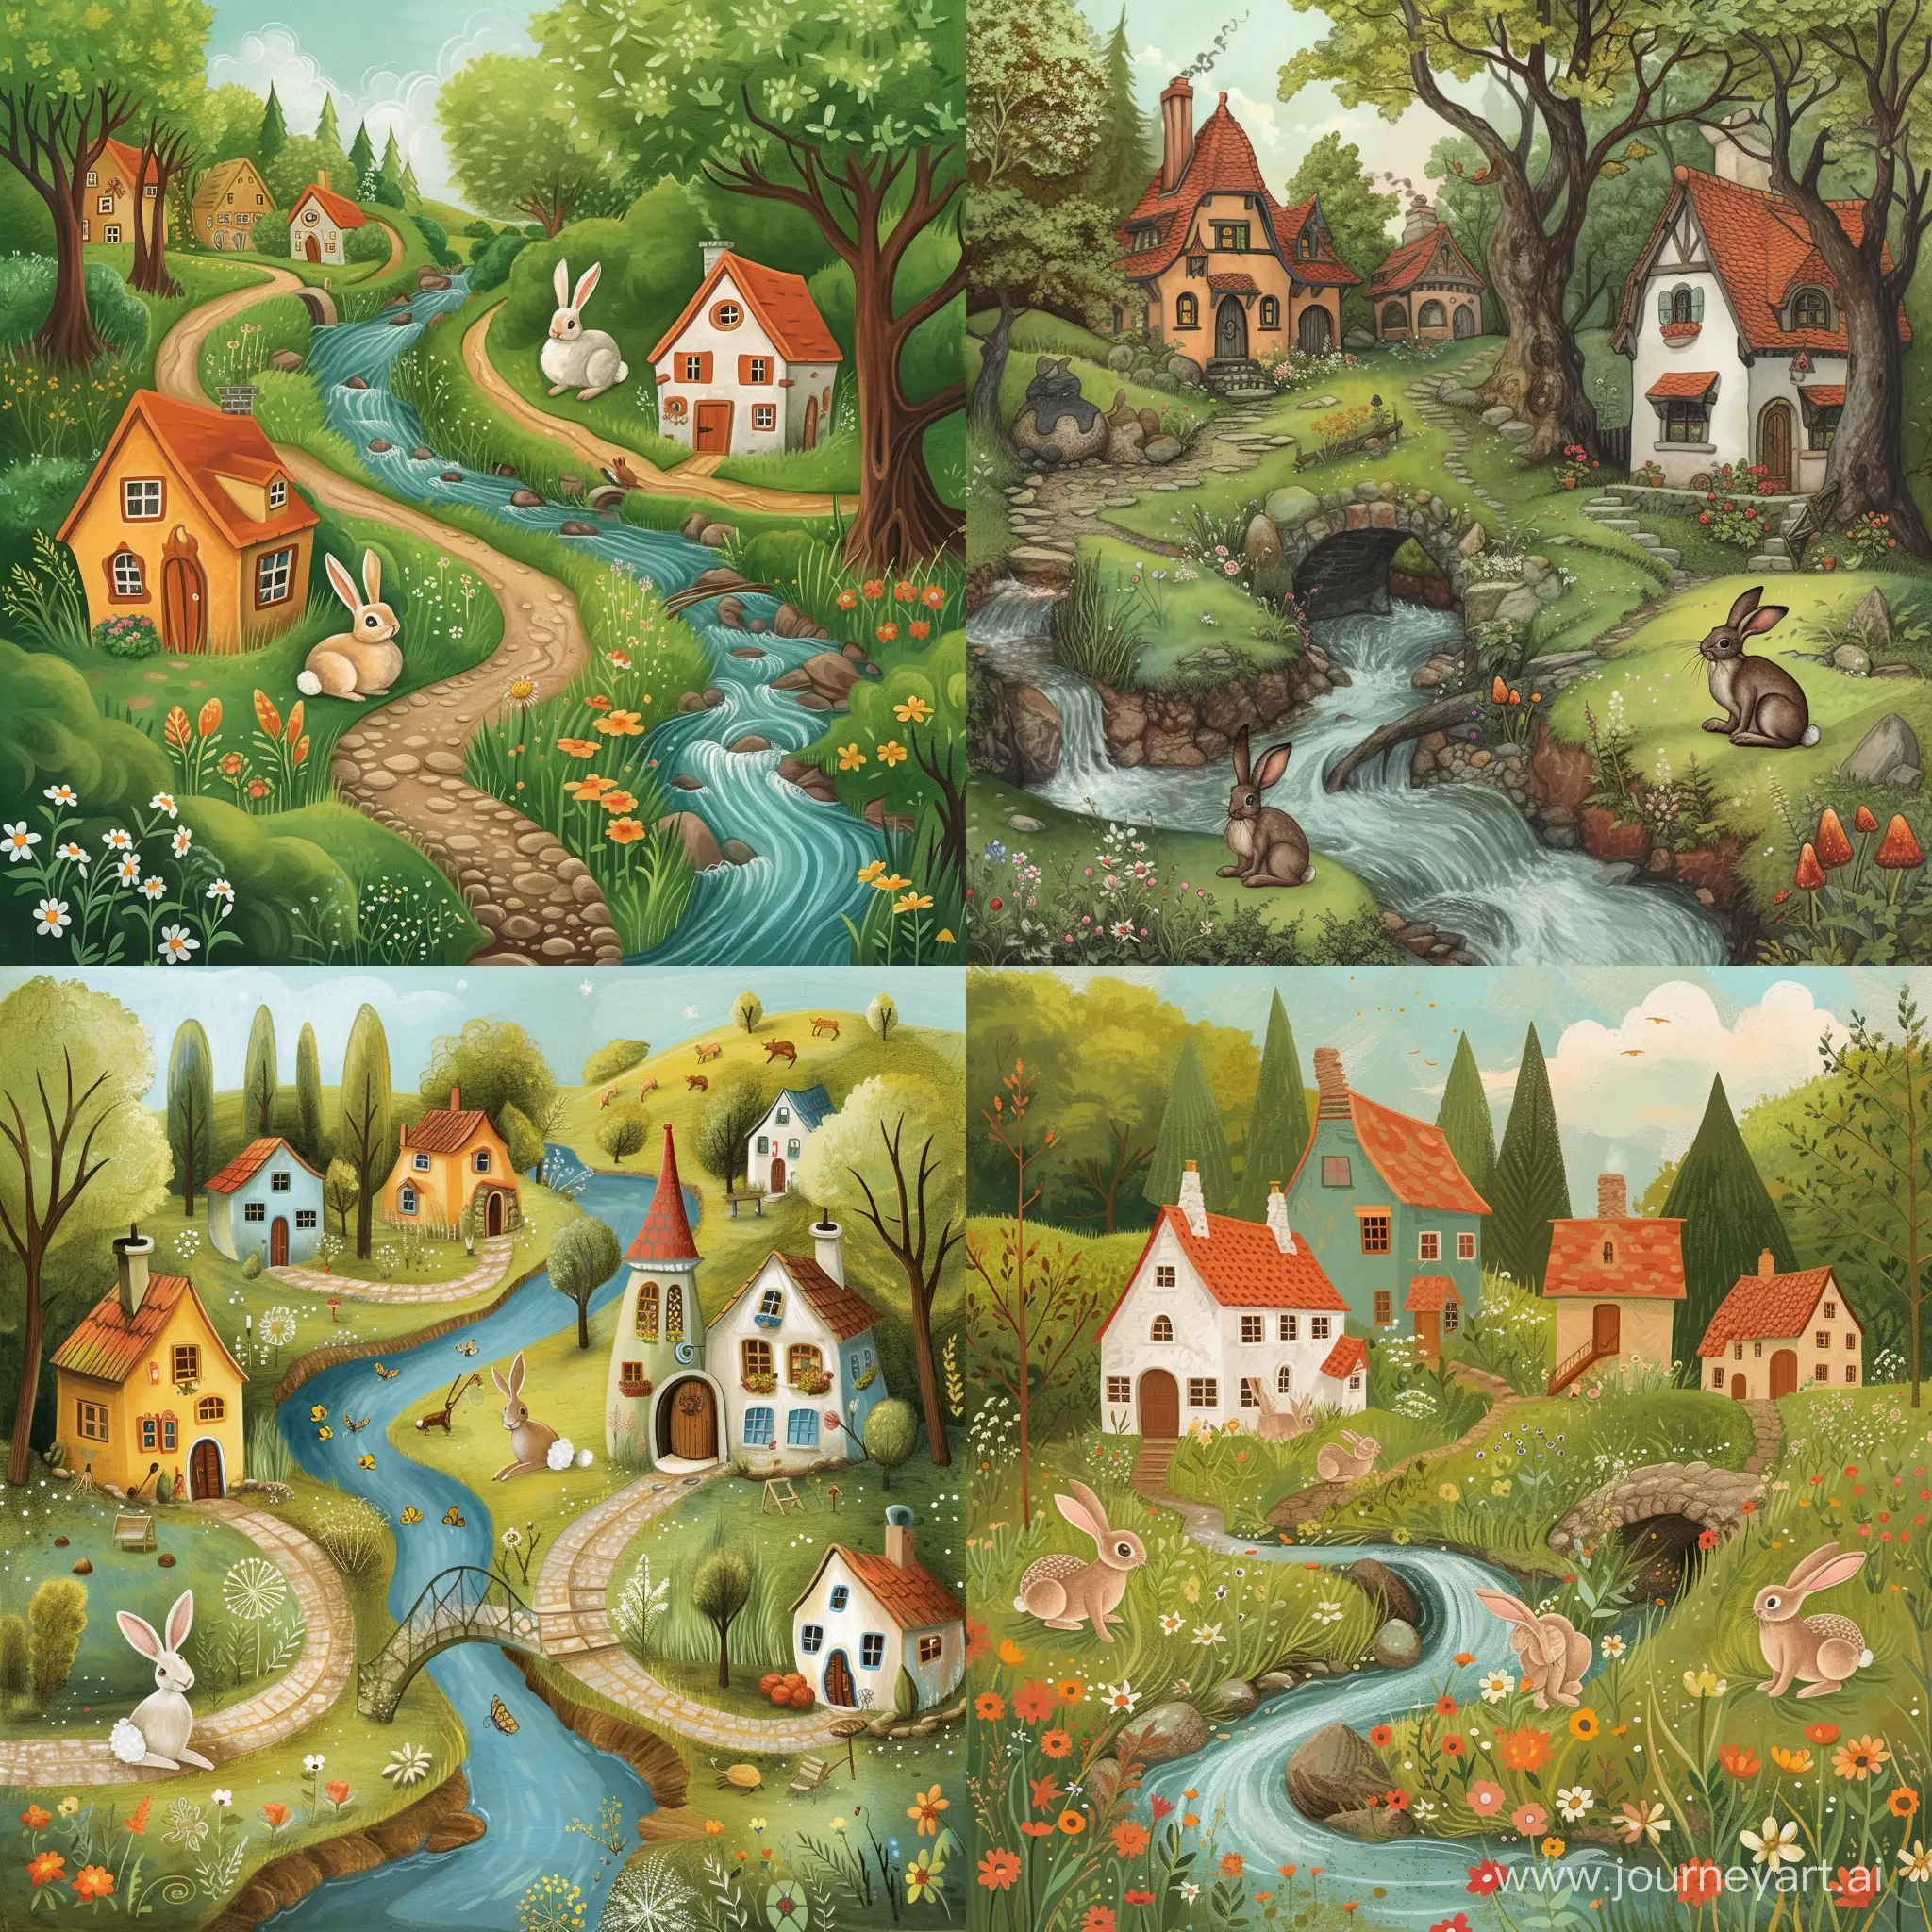 Enchanting-Fairy-Tale-Scene-Whimsical-Houses-and-Playful-Hares-by-a-Babbling-Stream